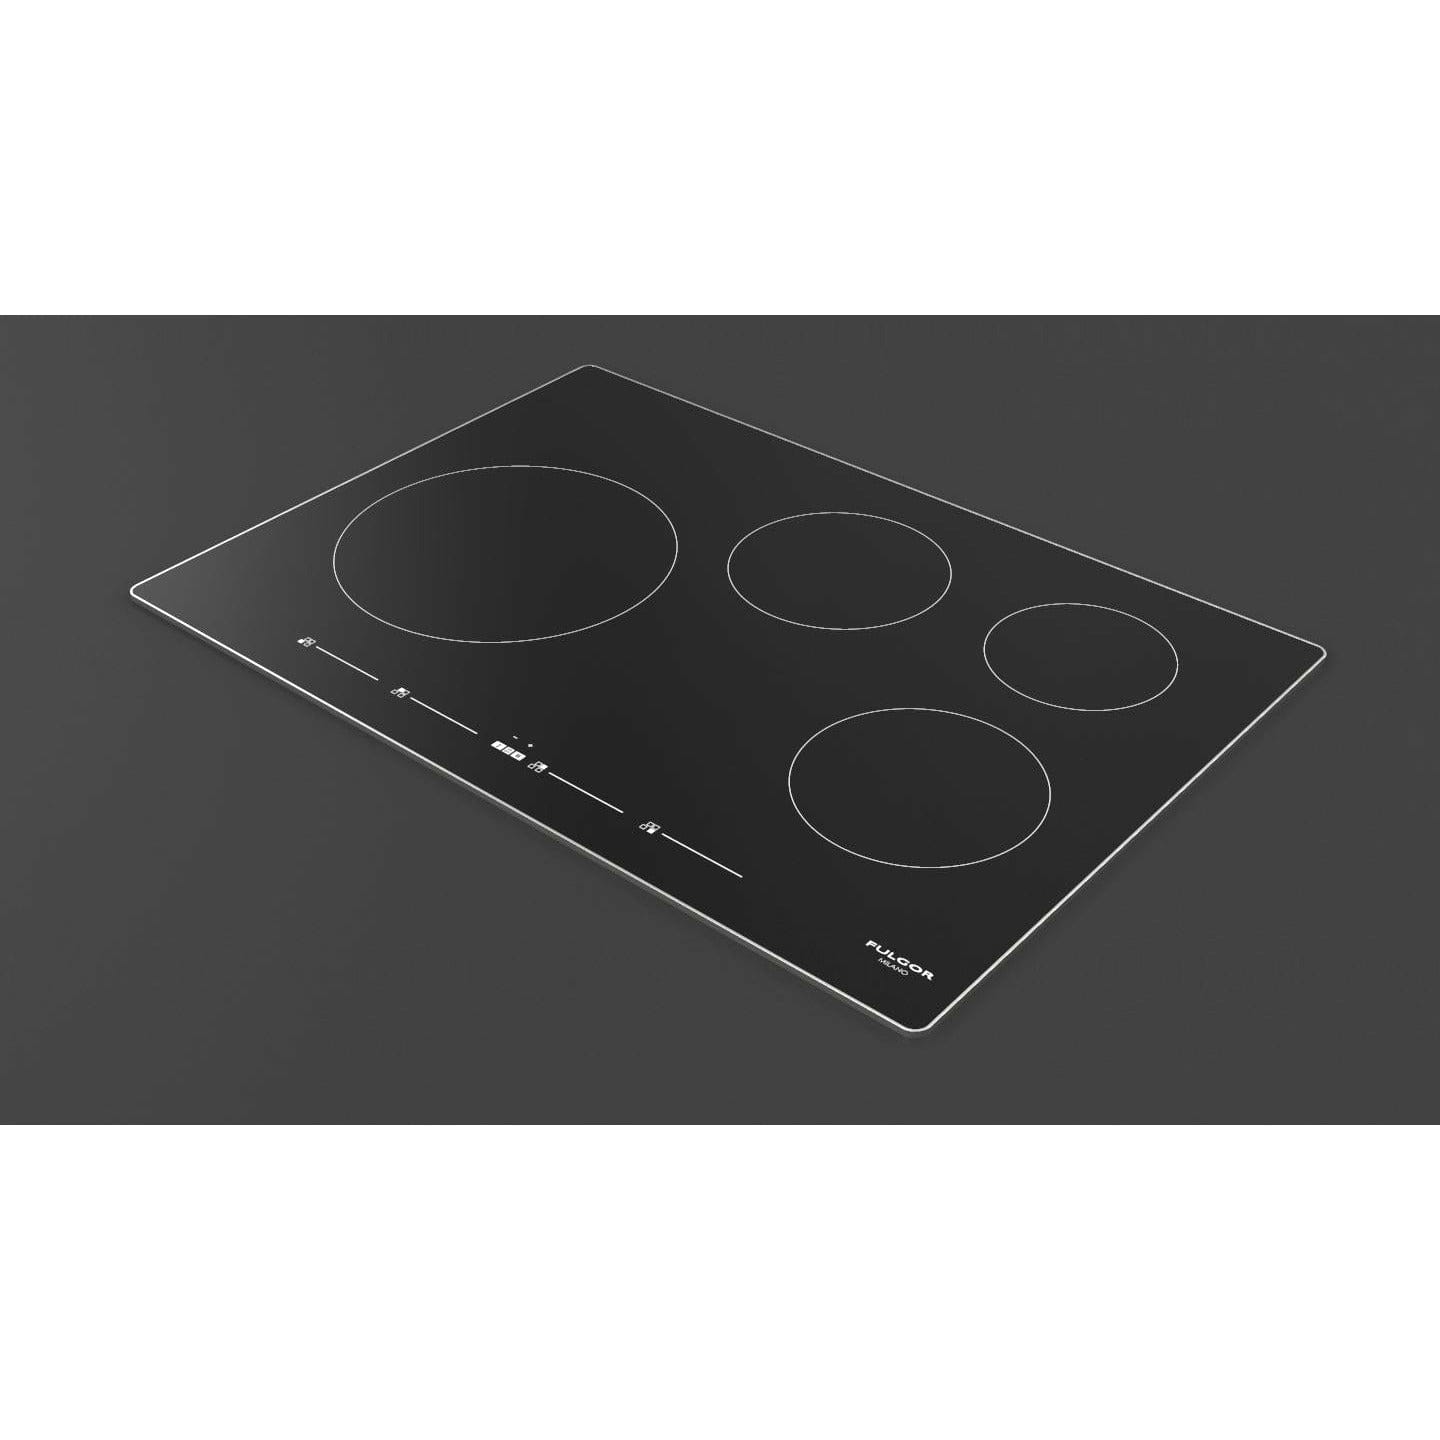 Fulgor Milano 30" Induction Cooktop with 4 Magnetic Burners - F7IT30S1 Cooktops F7IT30S1 Luxury Appliances Direct